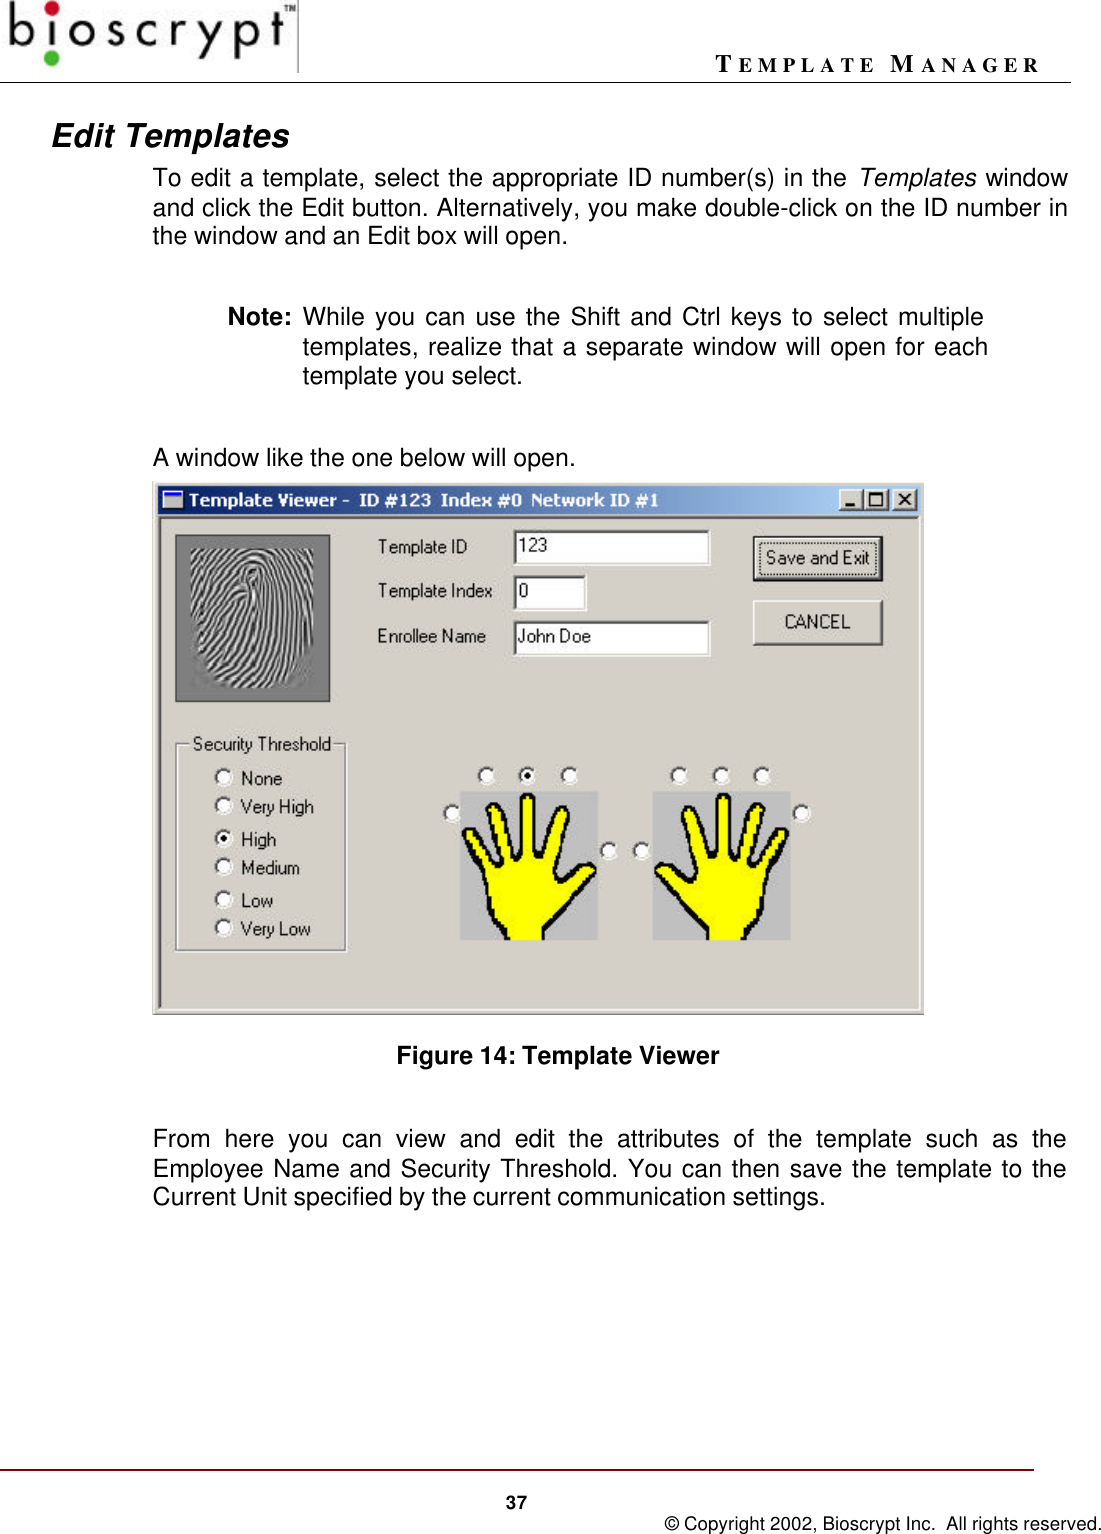 TEMPLATE MANAGER37 © Copyright 2002, Bioscrypt Inc.  All rights reserved.Edit TemplatesTo edit a template, select the appropriate ID number(s) in the Templates windowand click the Edit button. Alternatively, you make double-click on the ID number inthe window and an Edit box will open.Note: While you can use the Shift and Ctrl keys to select multipletemplates, realize that a separate window will open for eachtemplate you select.A window like the one below will open.Figure 14: Template ViewerFrom here you can view and edit the attributes of the template such as theEmployee Name and Security Threshold. You can then save the template to theCurrent Unit specified by the current communication settings.